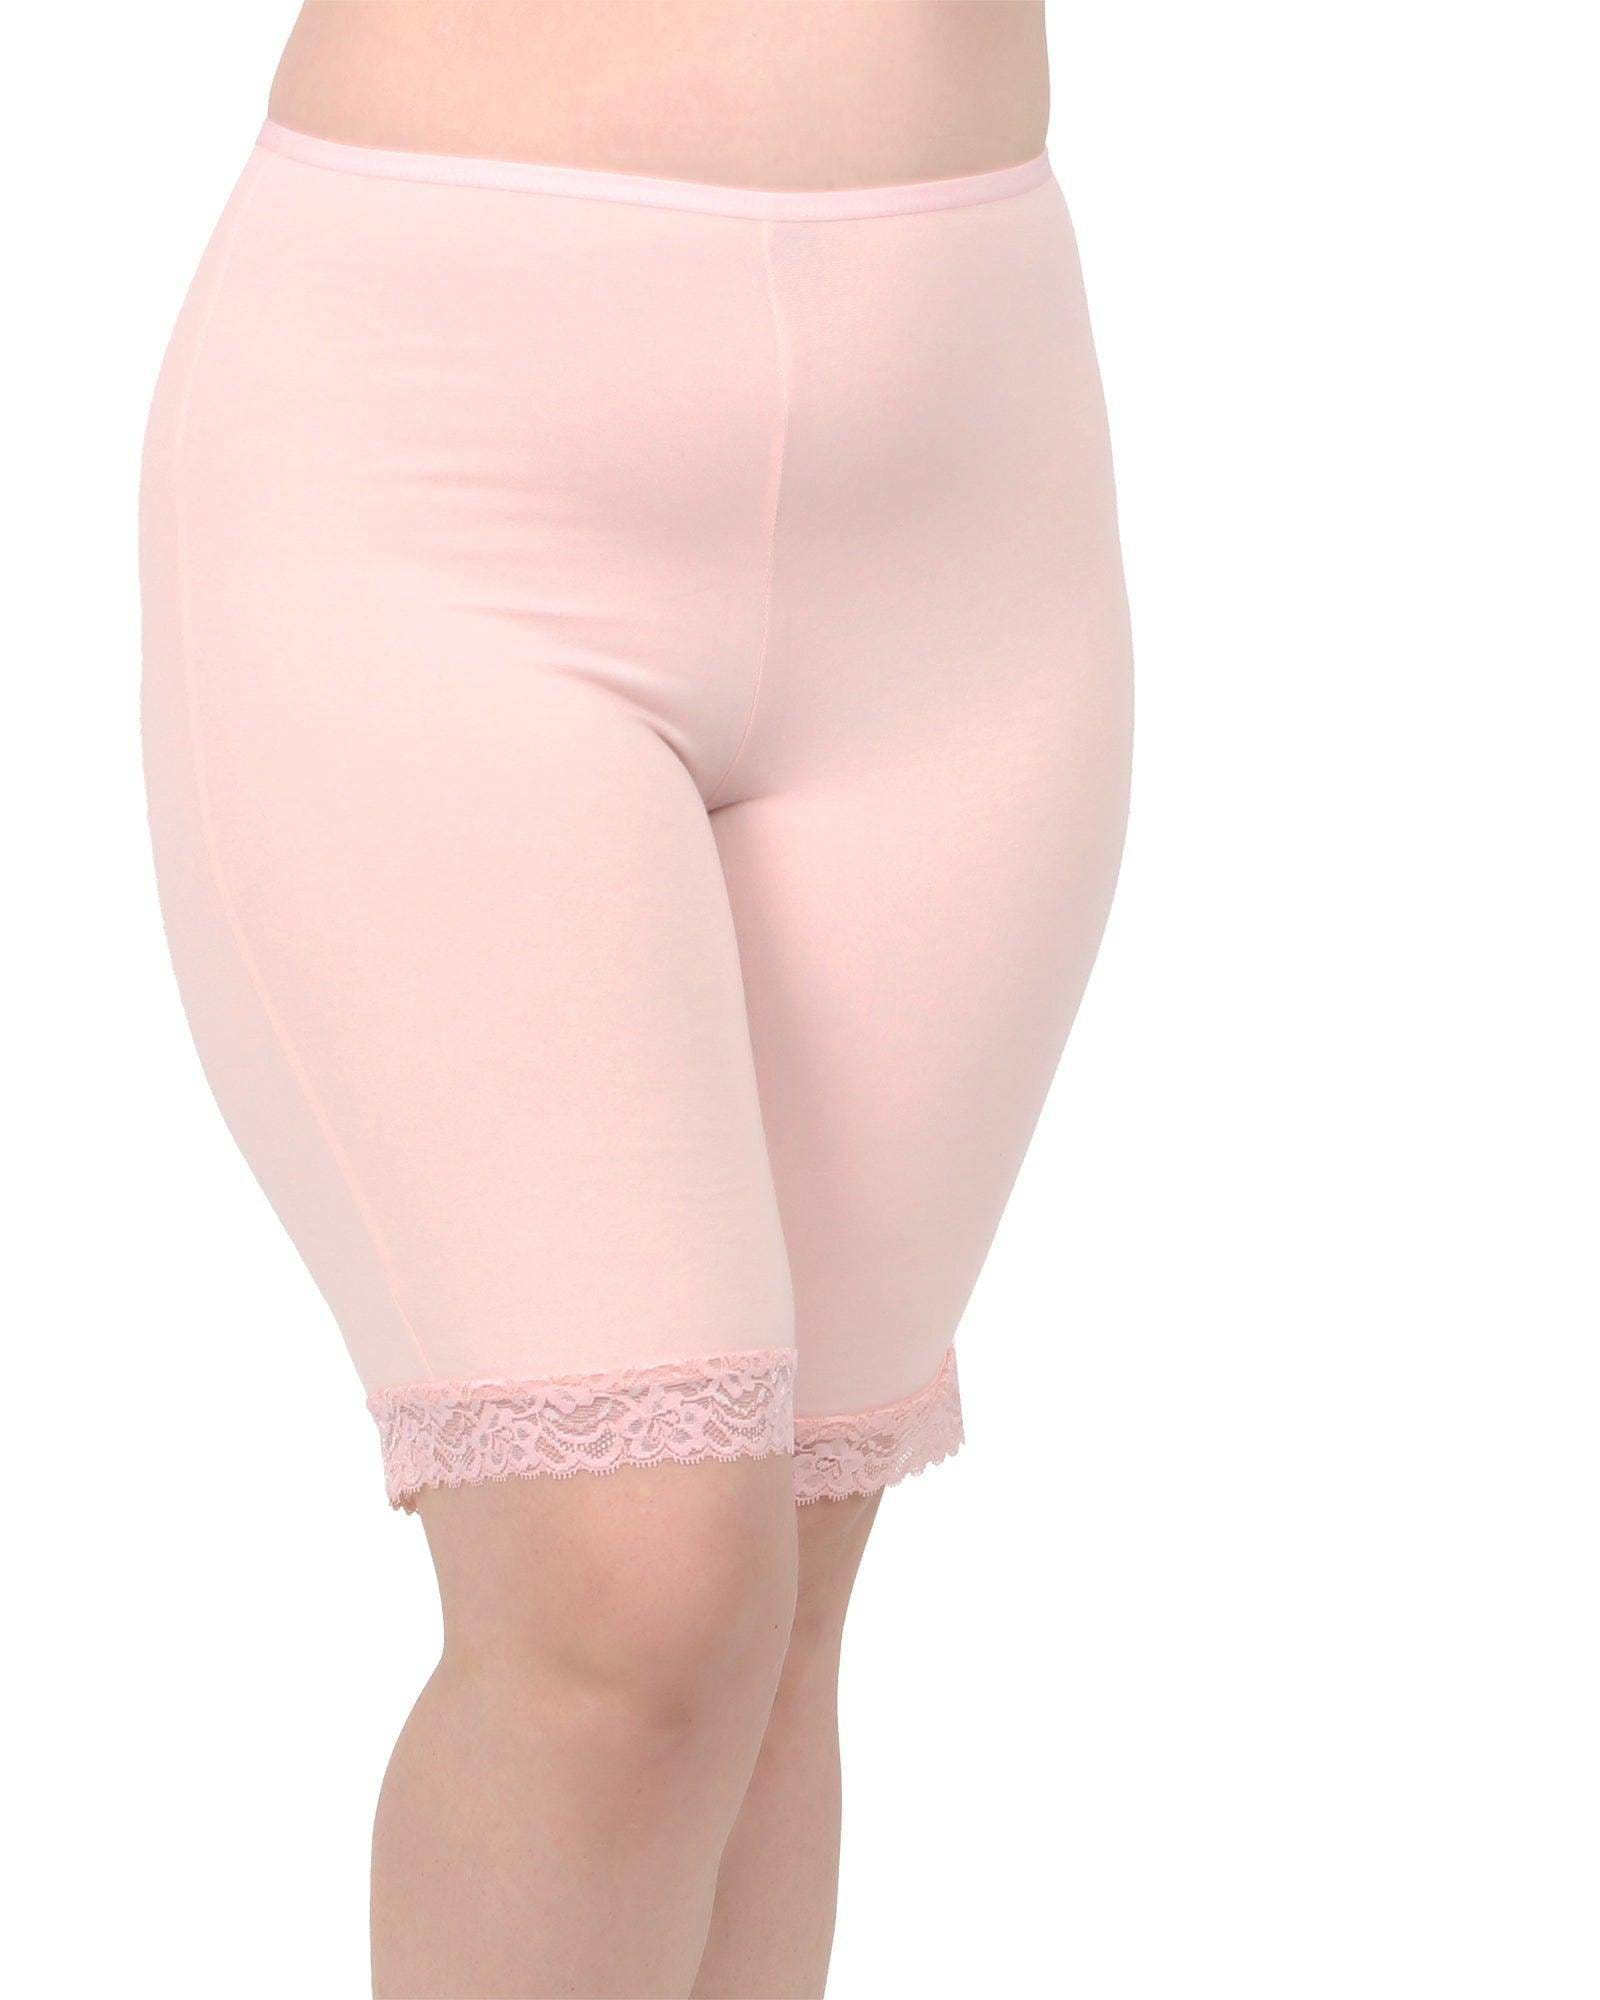 Lux Cotton Modal Anti Chafing Slipshort | Iced Rose